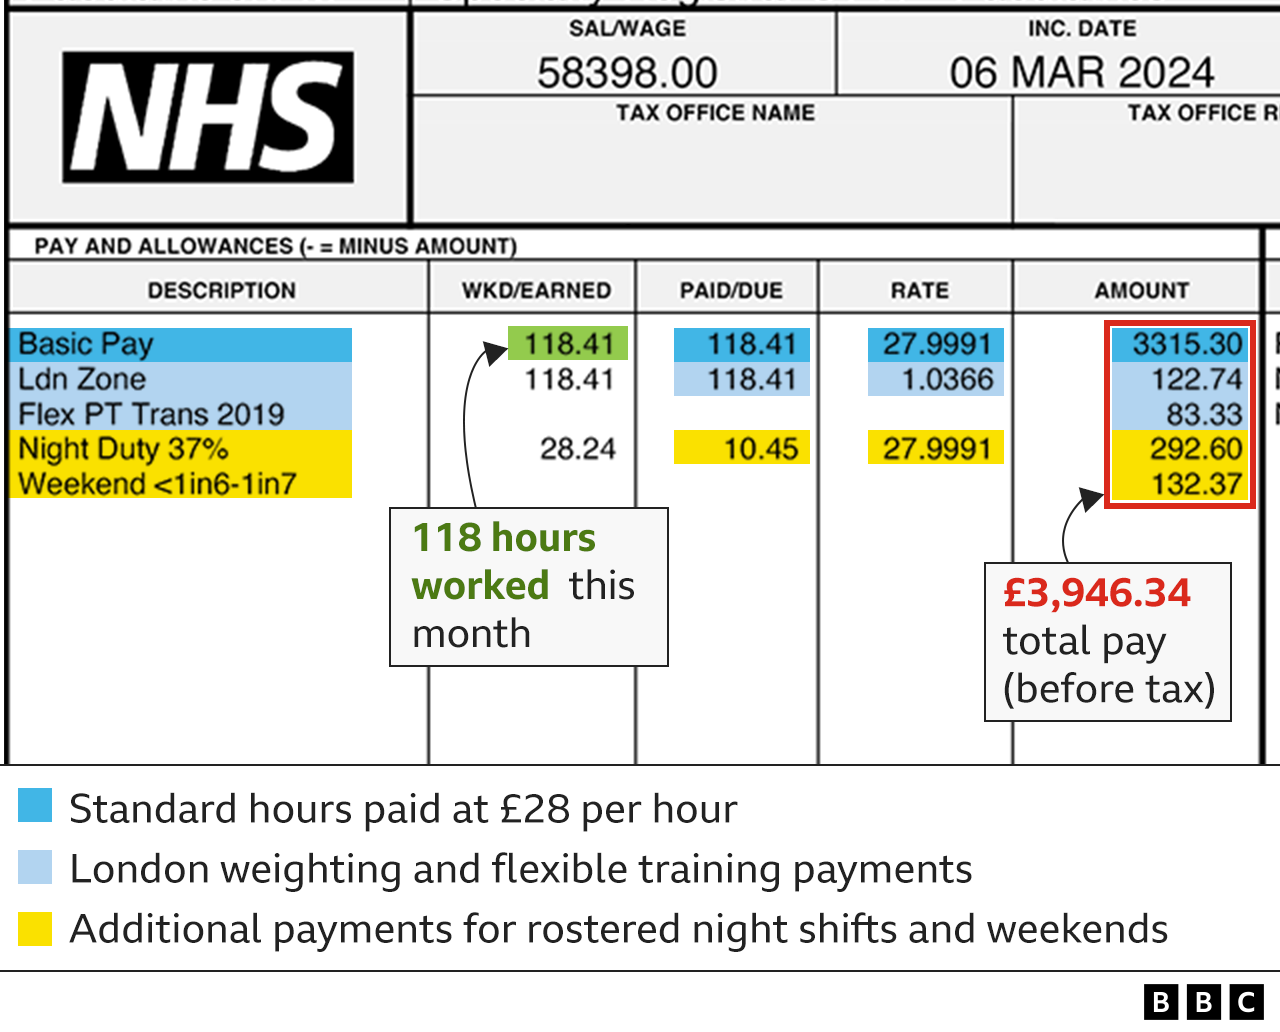 Wage slip for monthly payments and allowances, showing basic pay at £27.99 per hour, London weighting at £1.04 per hour and flexible training payments of £83.33 each month, plus additional payments for night shifts as an extra 37% of basic pay and weekend work as a flat payment of £132.37 per month. The total number of hours worked was 118.41 hours and the total pay before tax was £3,946.34.